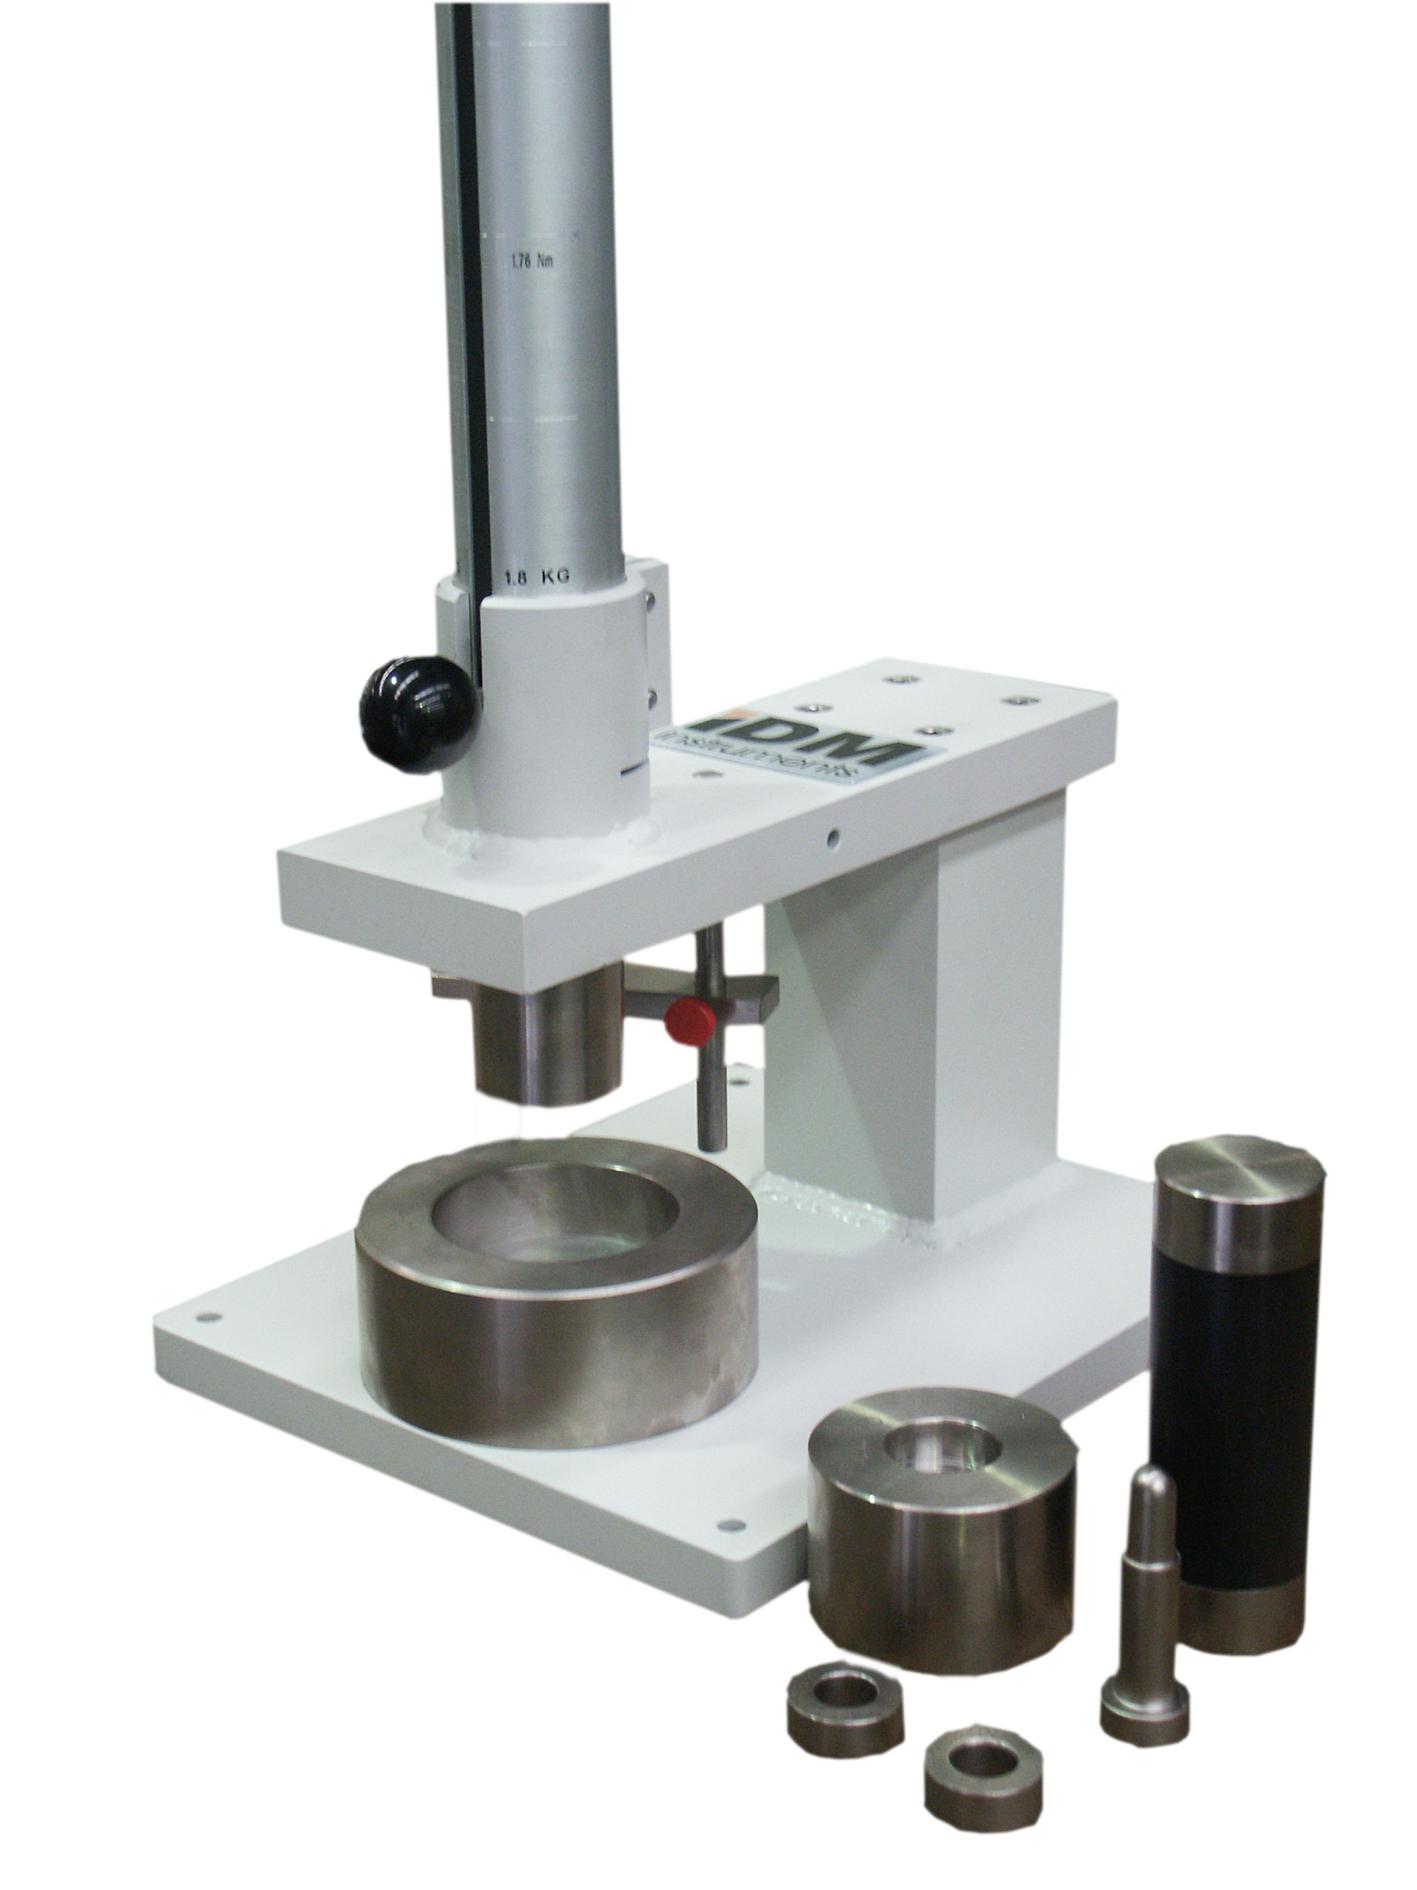 New Delivery for Cartridges Tester - G0001 – Gardner Type Impact Tester – Drick